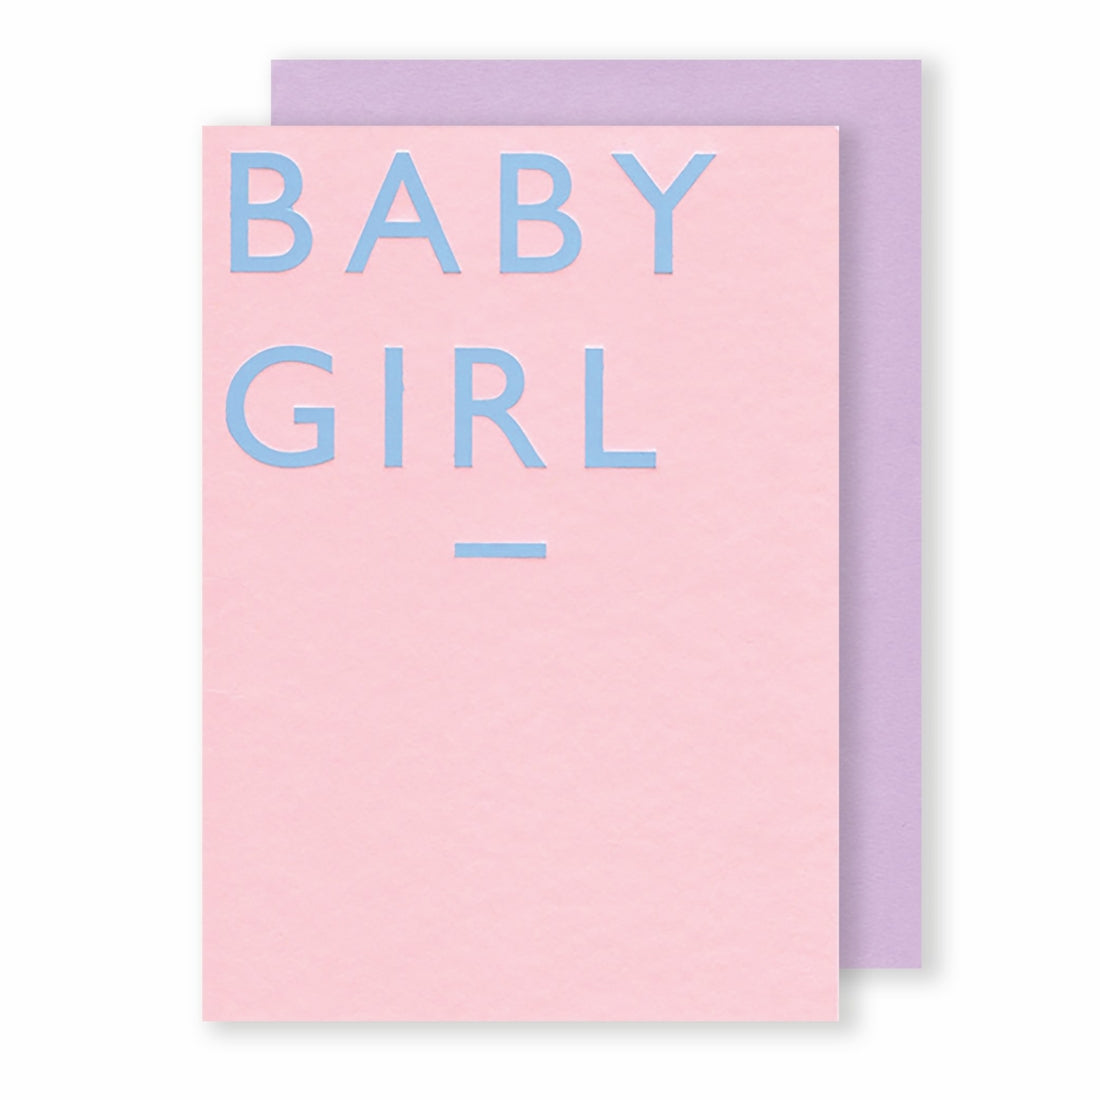 Mock Up Designs baby girl hand foiled card against white backdrop